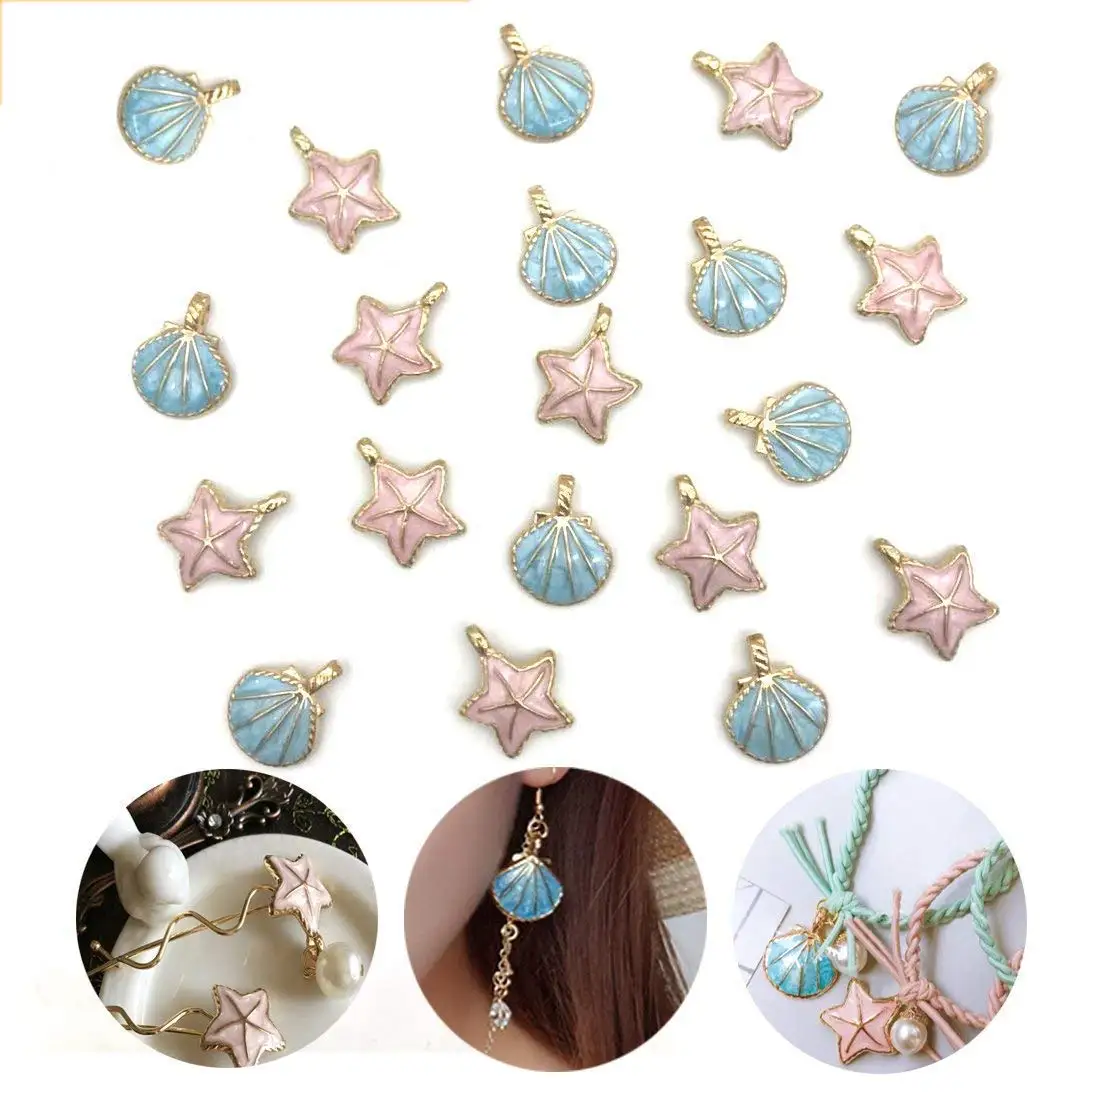 

20 pcs Seashell Starfish Charms, Starfish Beads,Aluminum alloy Charms Pendants for Jewelry Making and Crafting